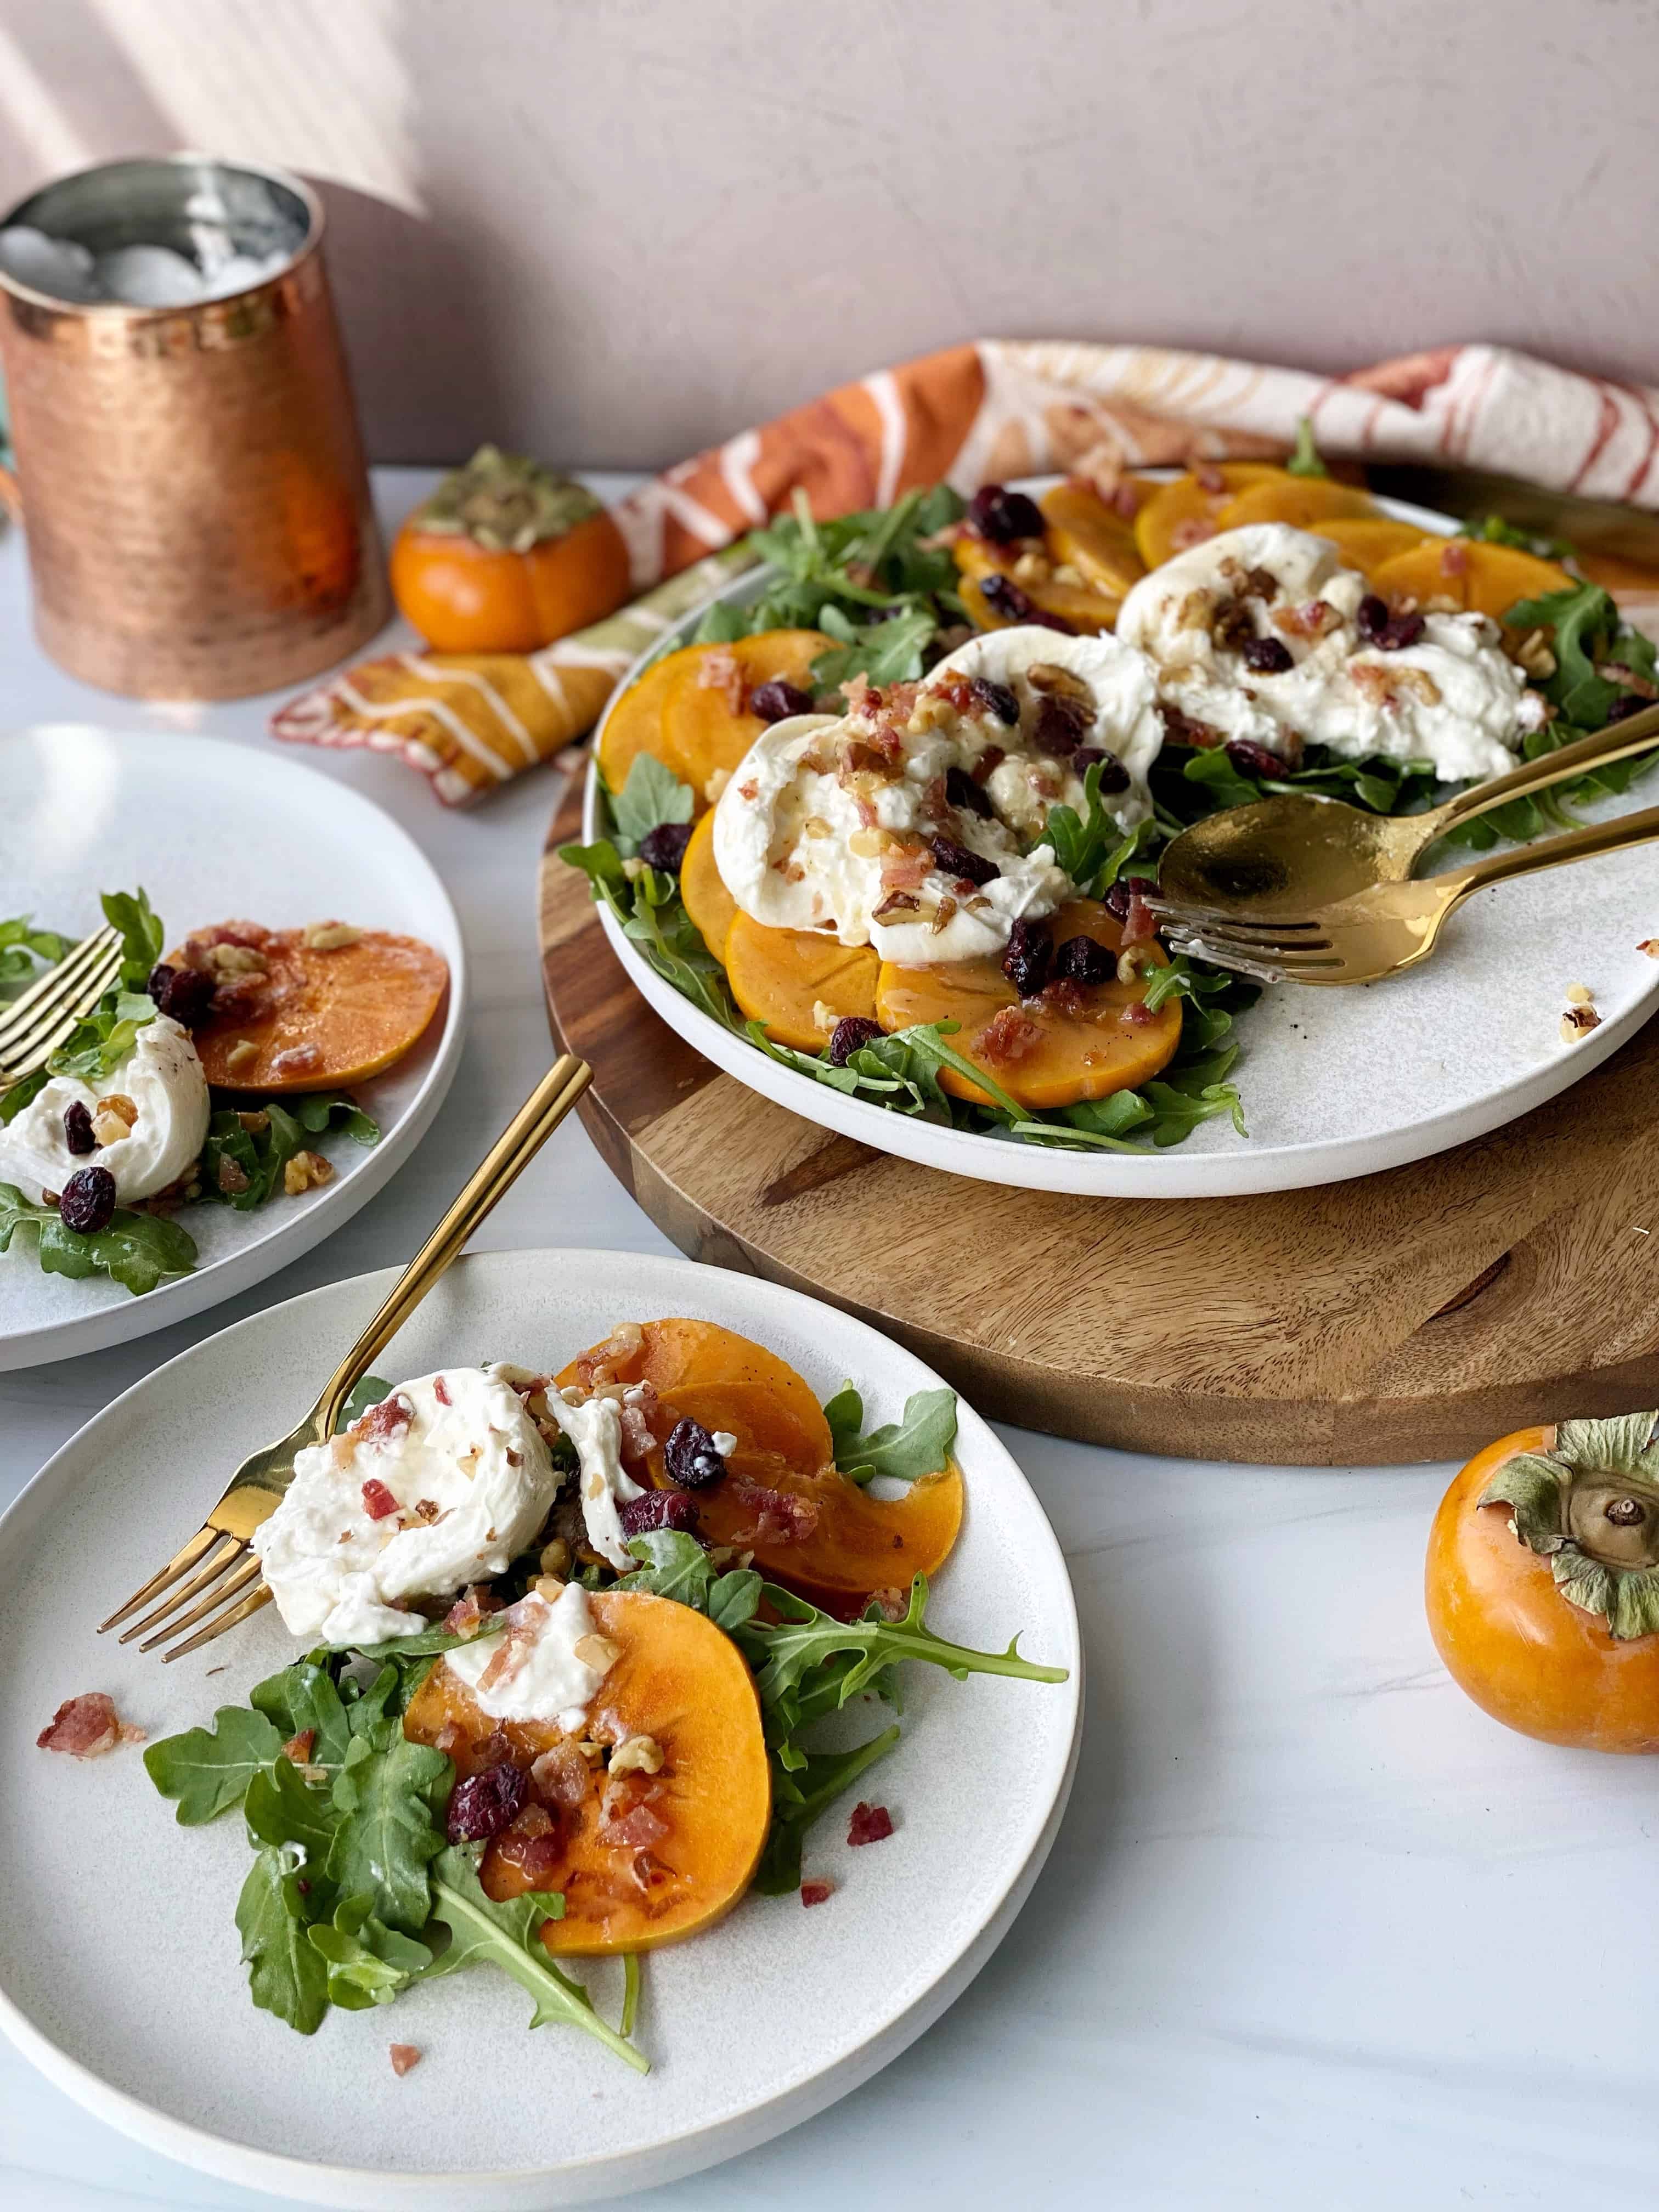 Persimmon Salad with Burrata, Dried Cranberries, Bacon, and Walnuts